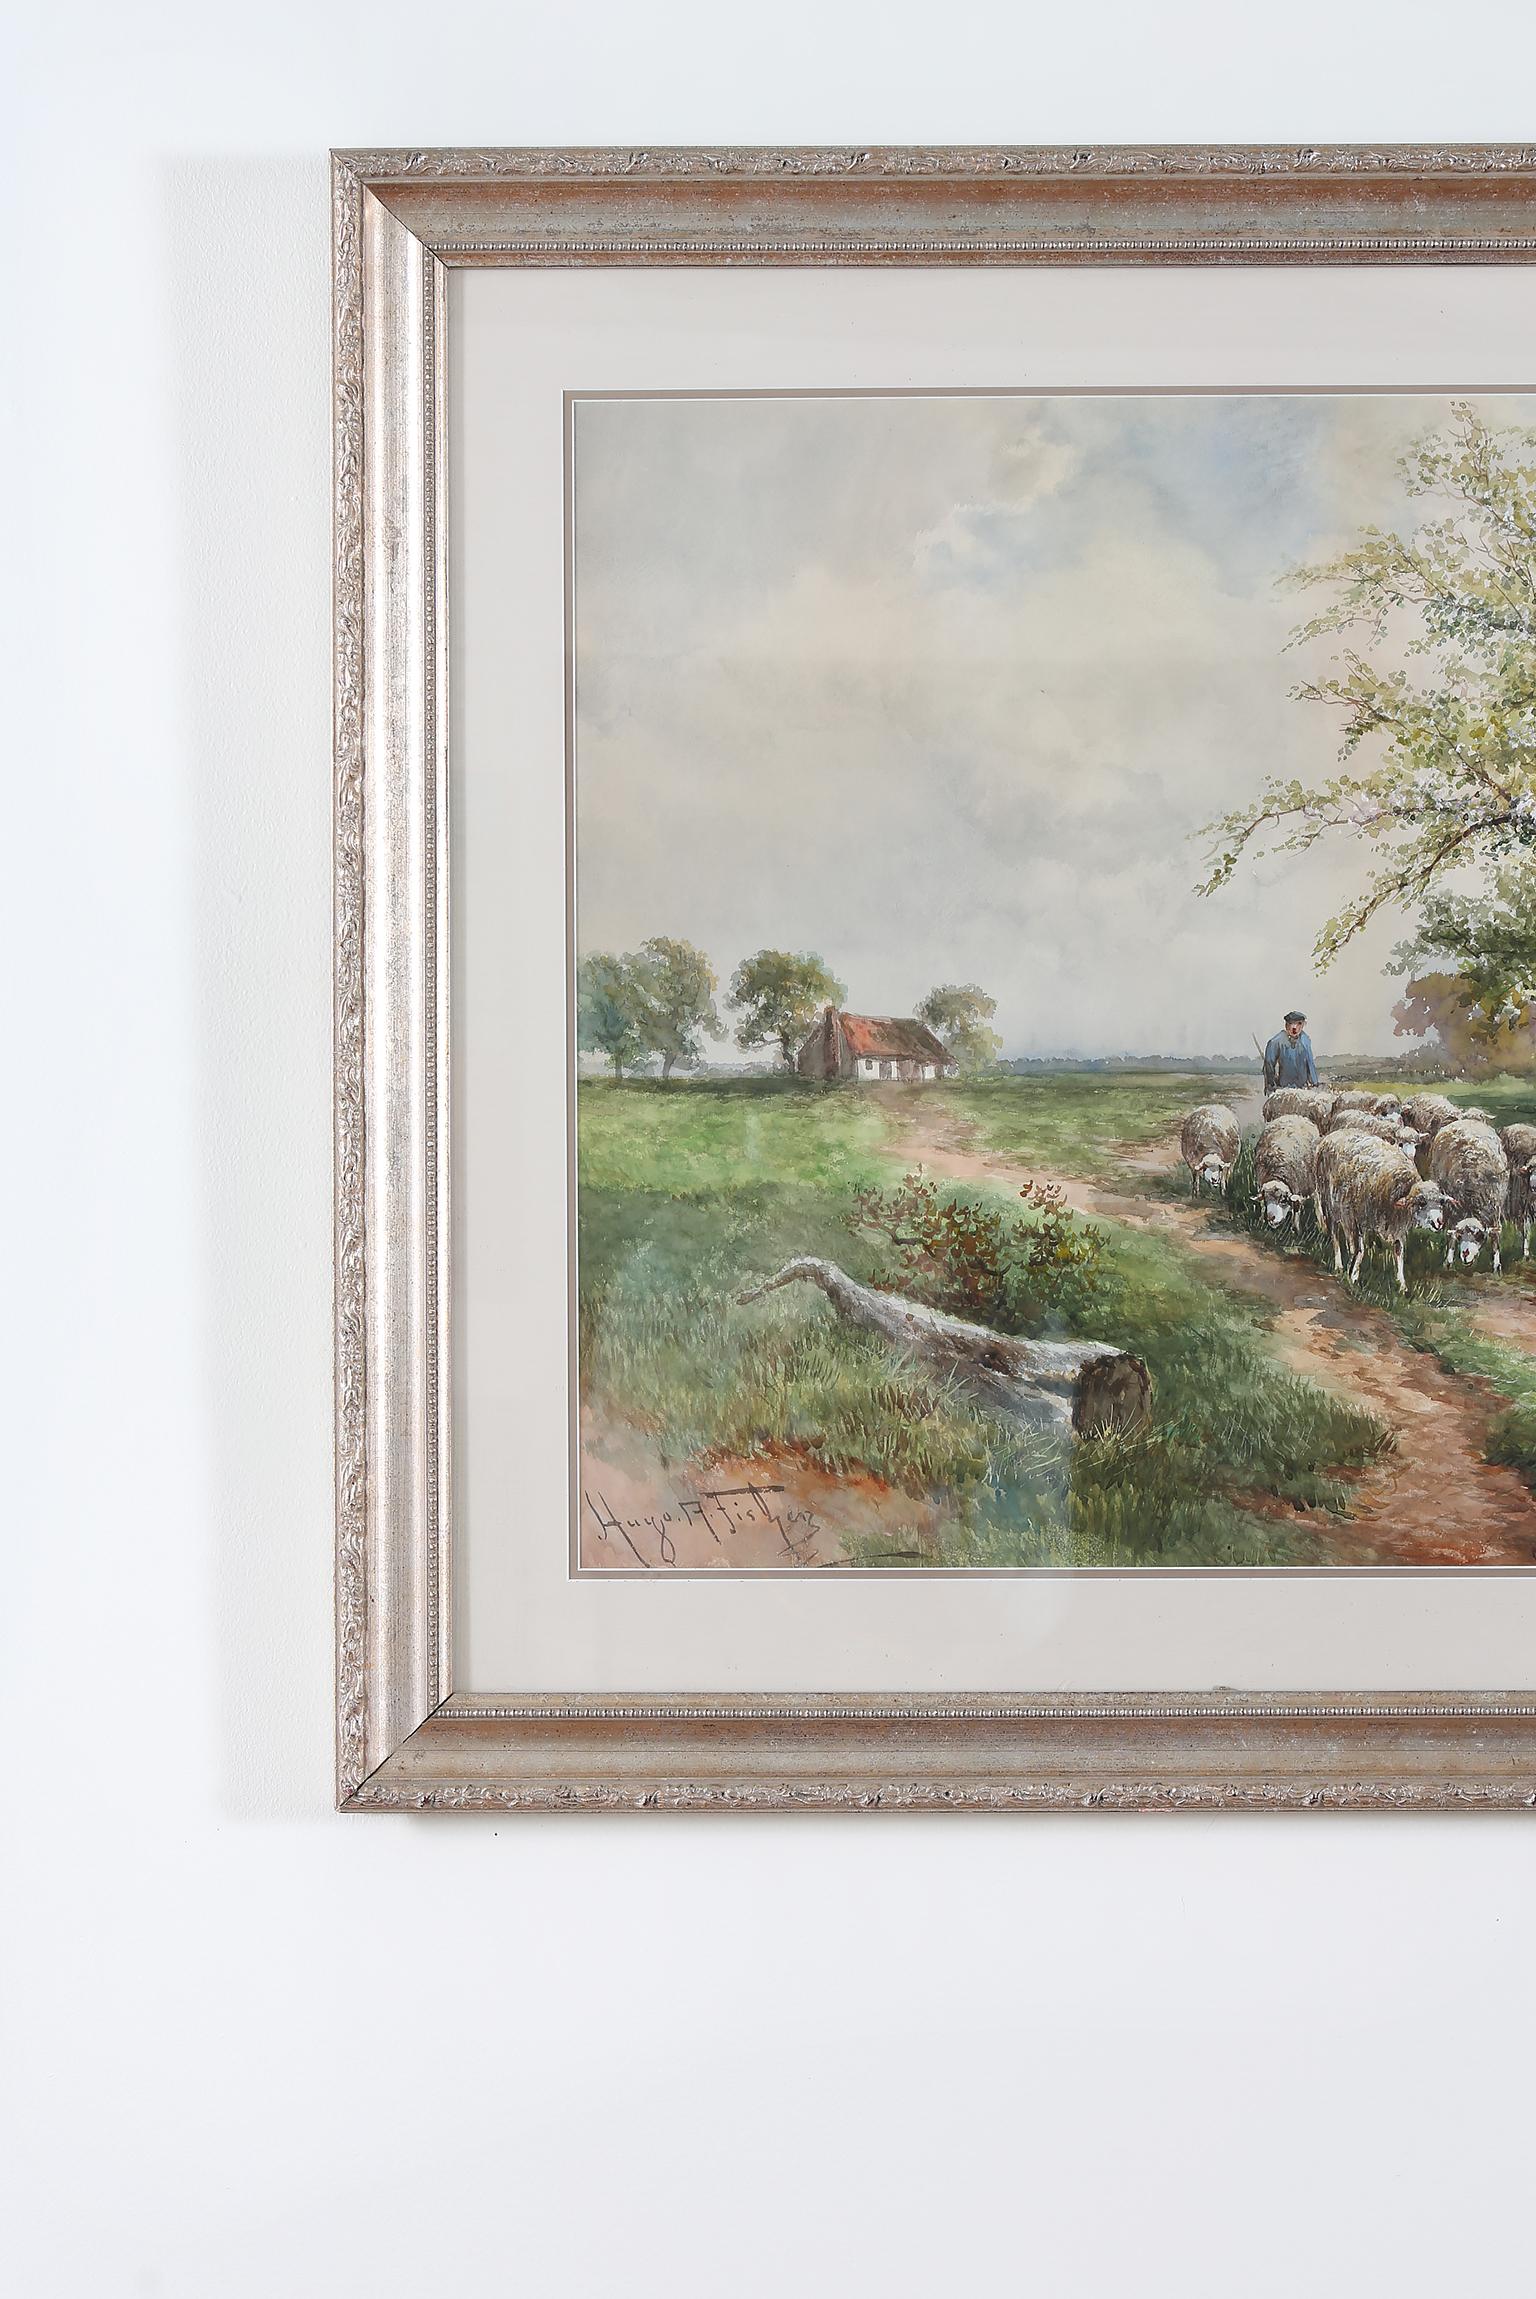 Giltwood framed water color painting of herding sheep. The painting is in great condition . Minor wear consistent with age / use. Artist signature lower left corner. It measures about 29